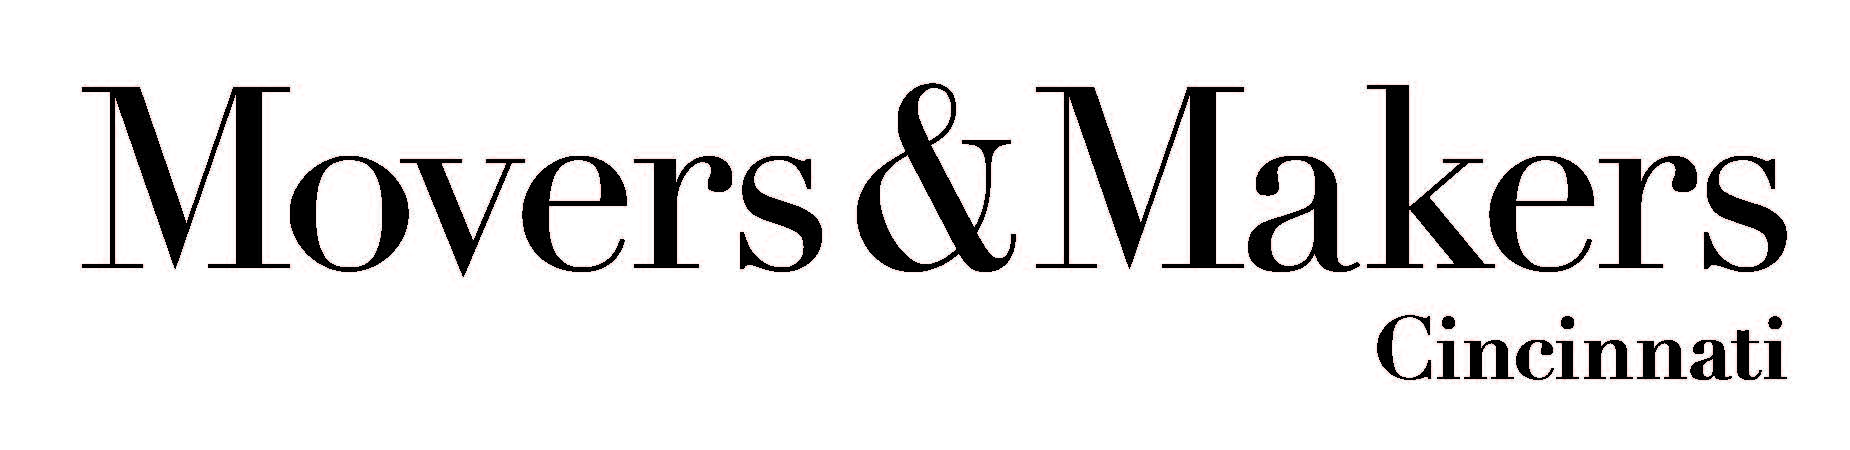 Movers & Makers logo